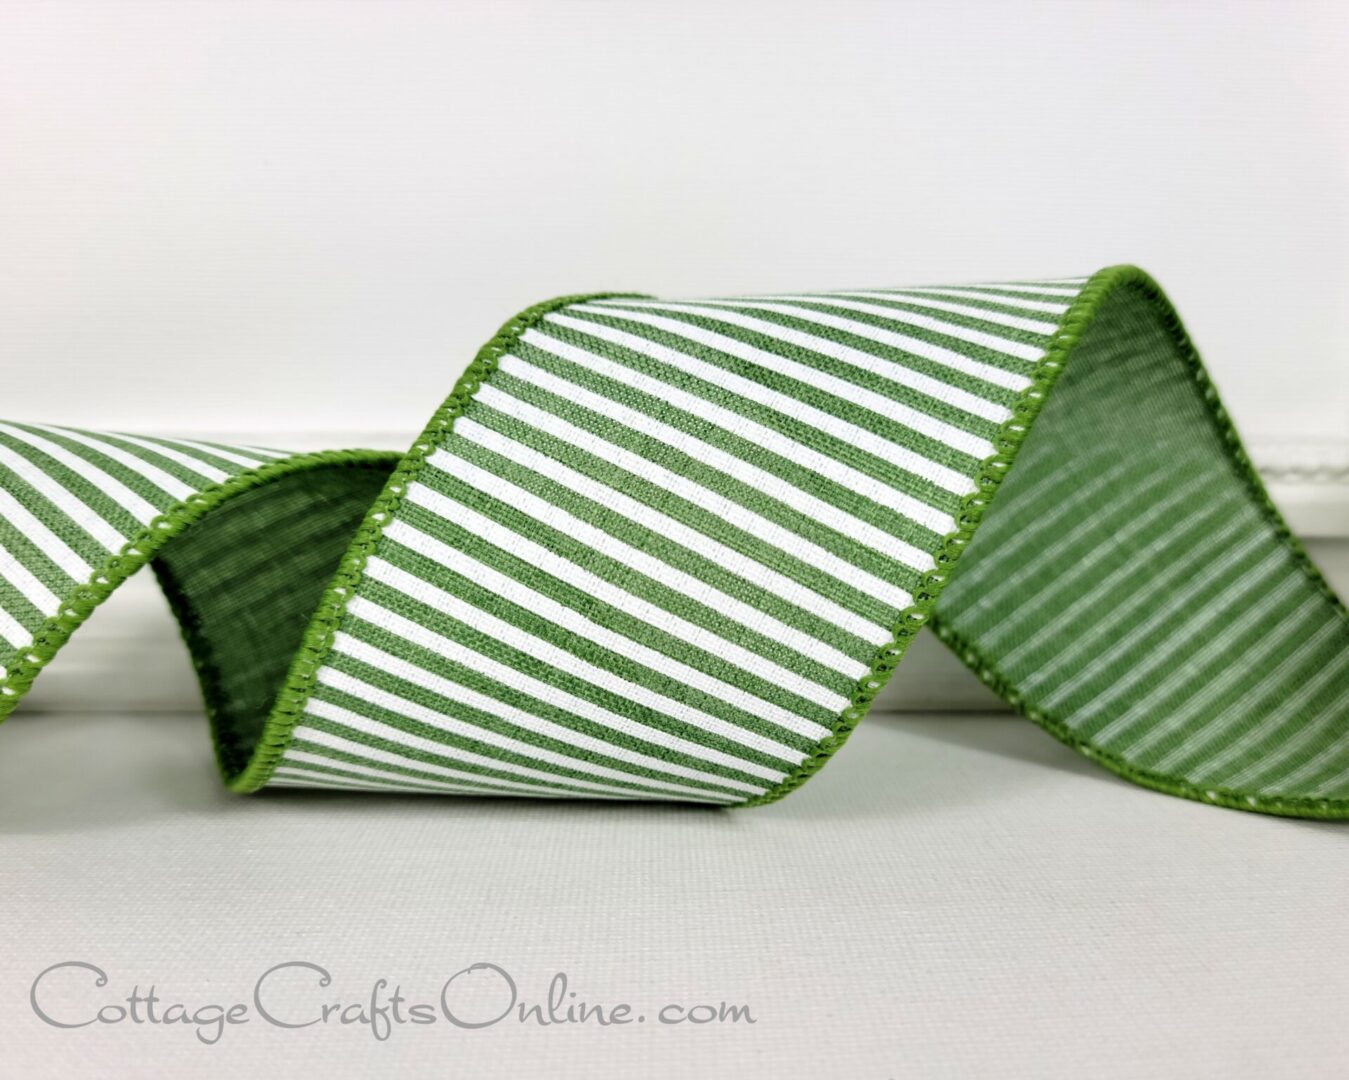 Clover green and white narrow horizontal stripes 2.5" wide wired ribbon from the Etsy shop of Cottage Crafts Online.